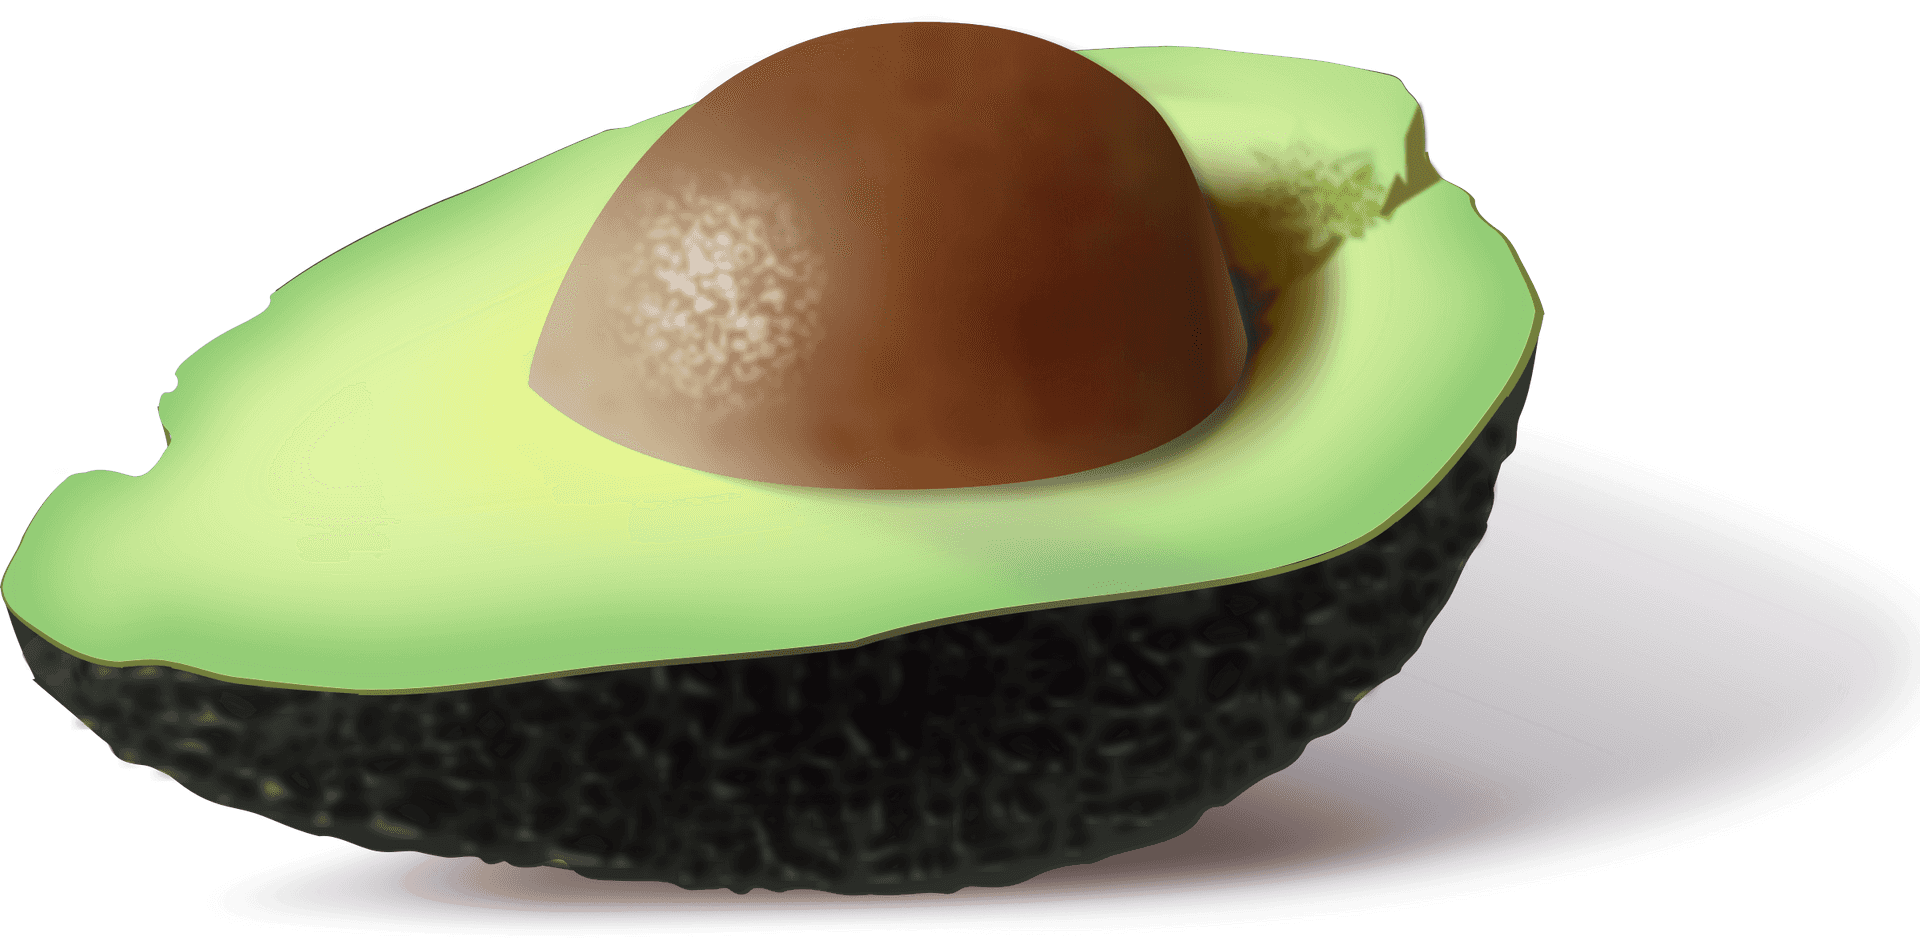 Half Avocadowith Pit PNG image